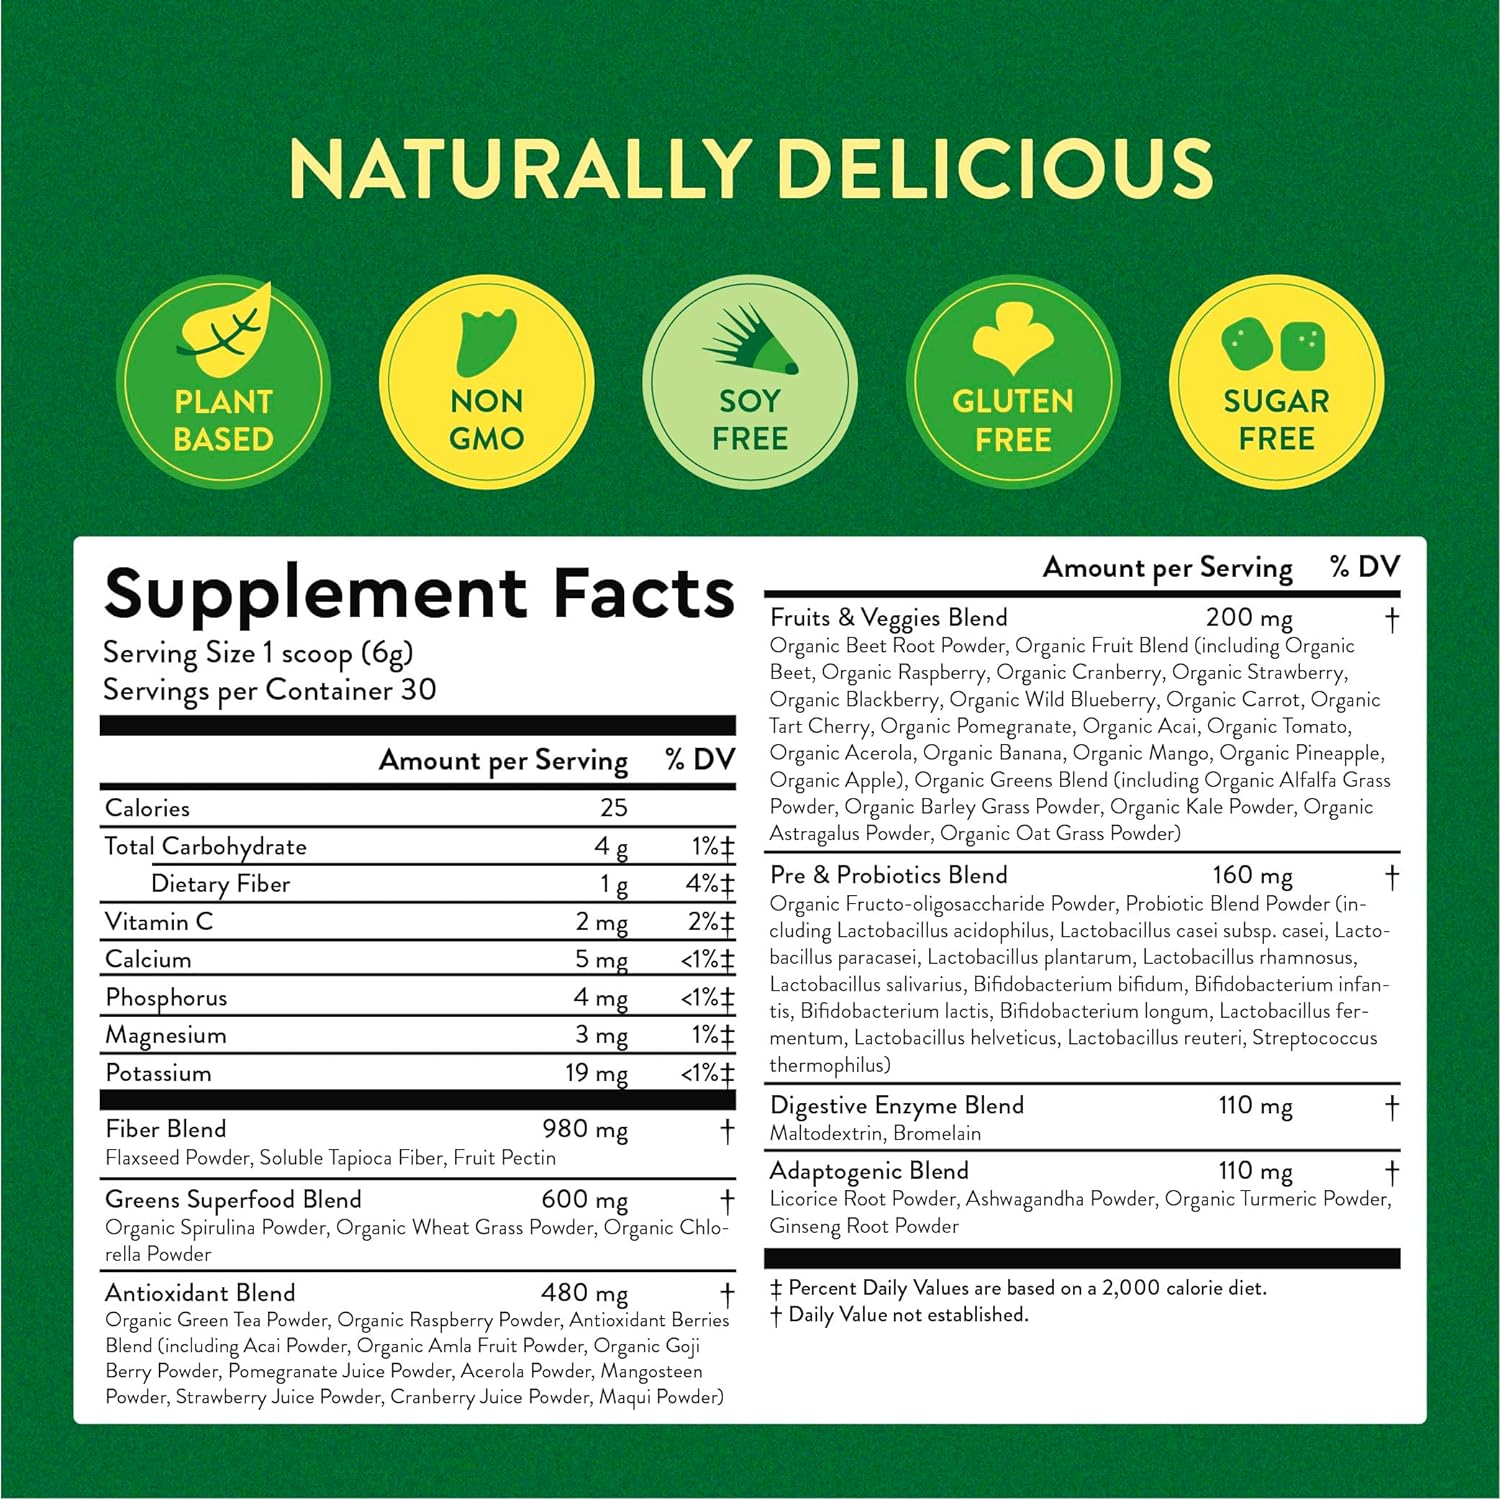 360 Nutrition Blends with Benefits Super Greens Powder w/Probiotics, Digestive Enzymes, Sugar Gluten Free, Plant Based Superfood Drink Mix for Gut Health, Bloating, Immunity, Overall Health, 6.35 oz